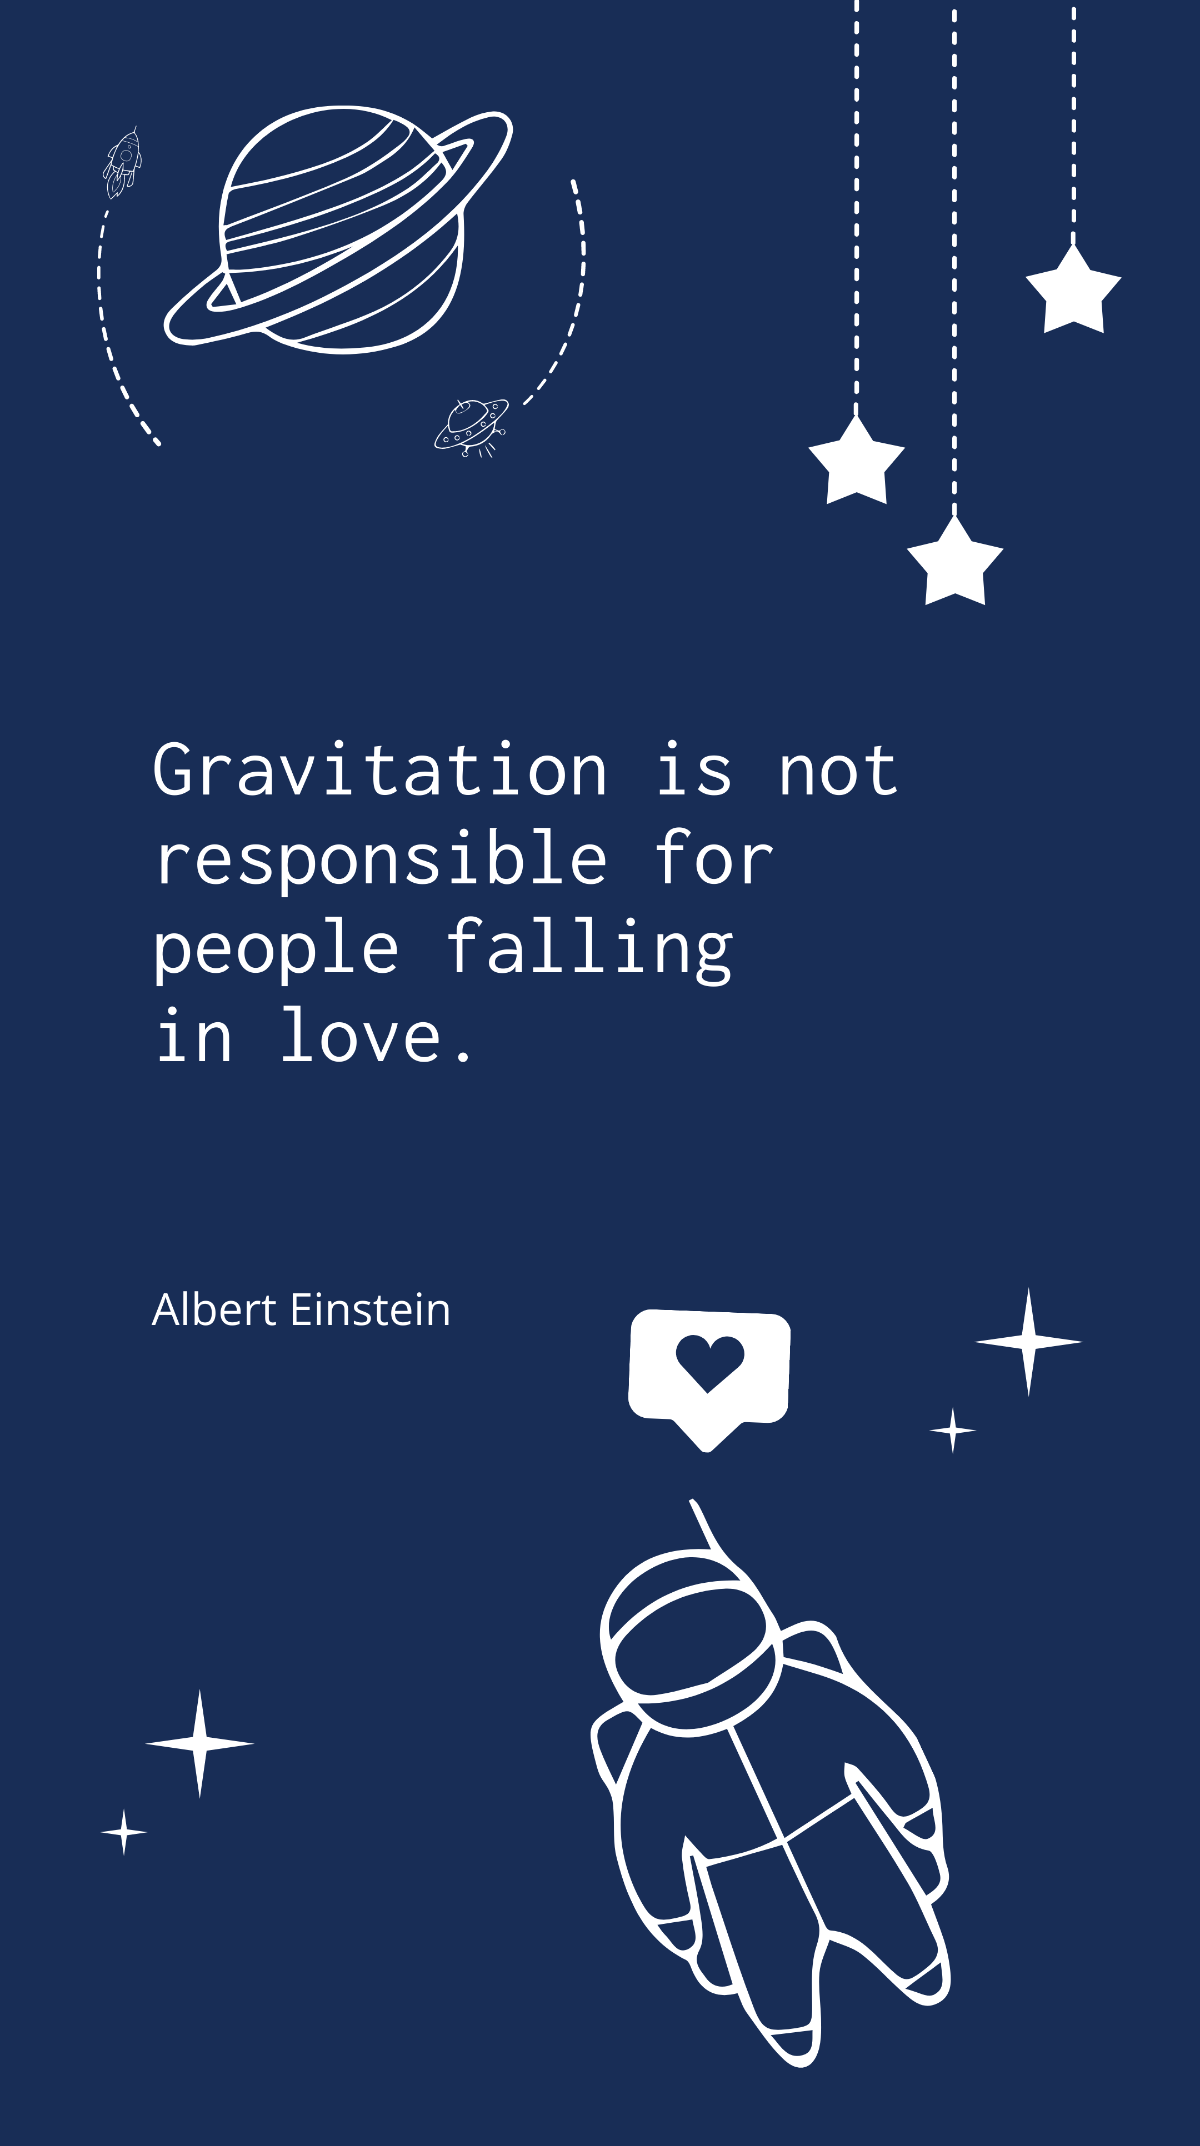 Free Albert Einstein - “Gravitation is not responsible for people falling in love.” Template